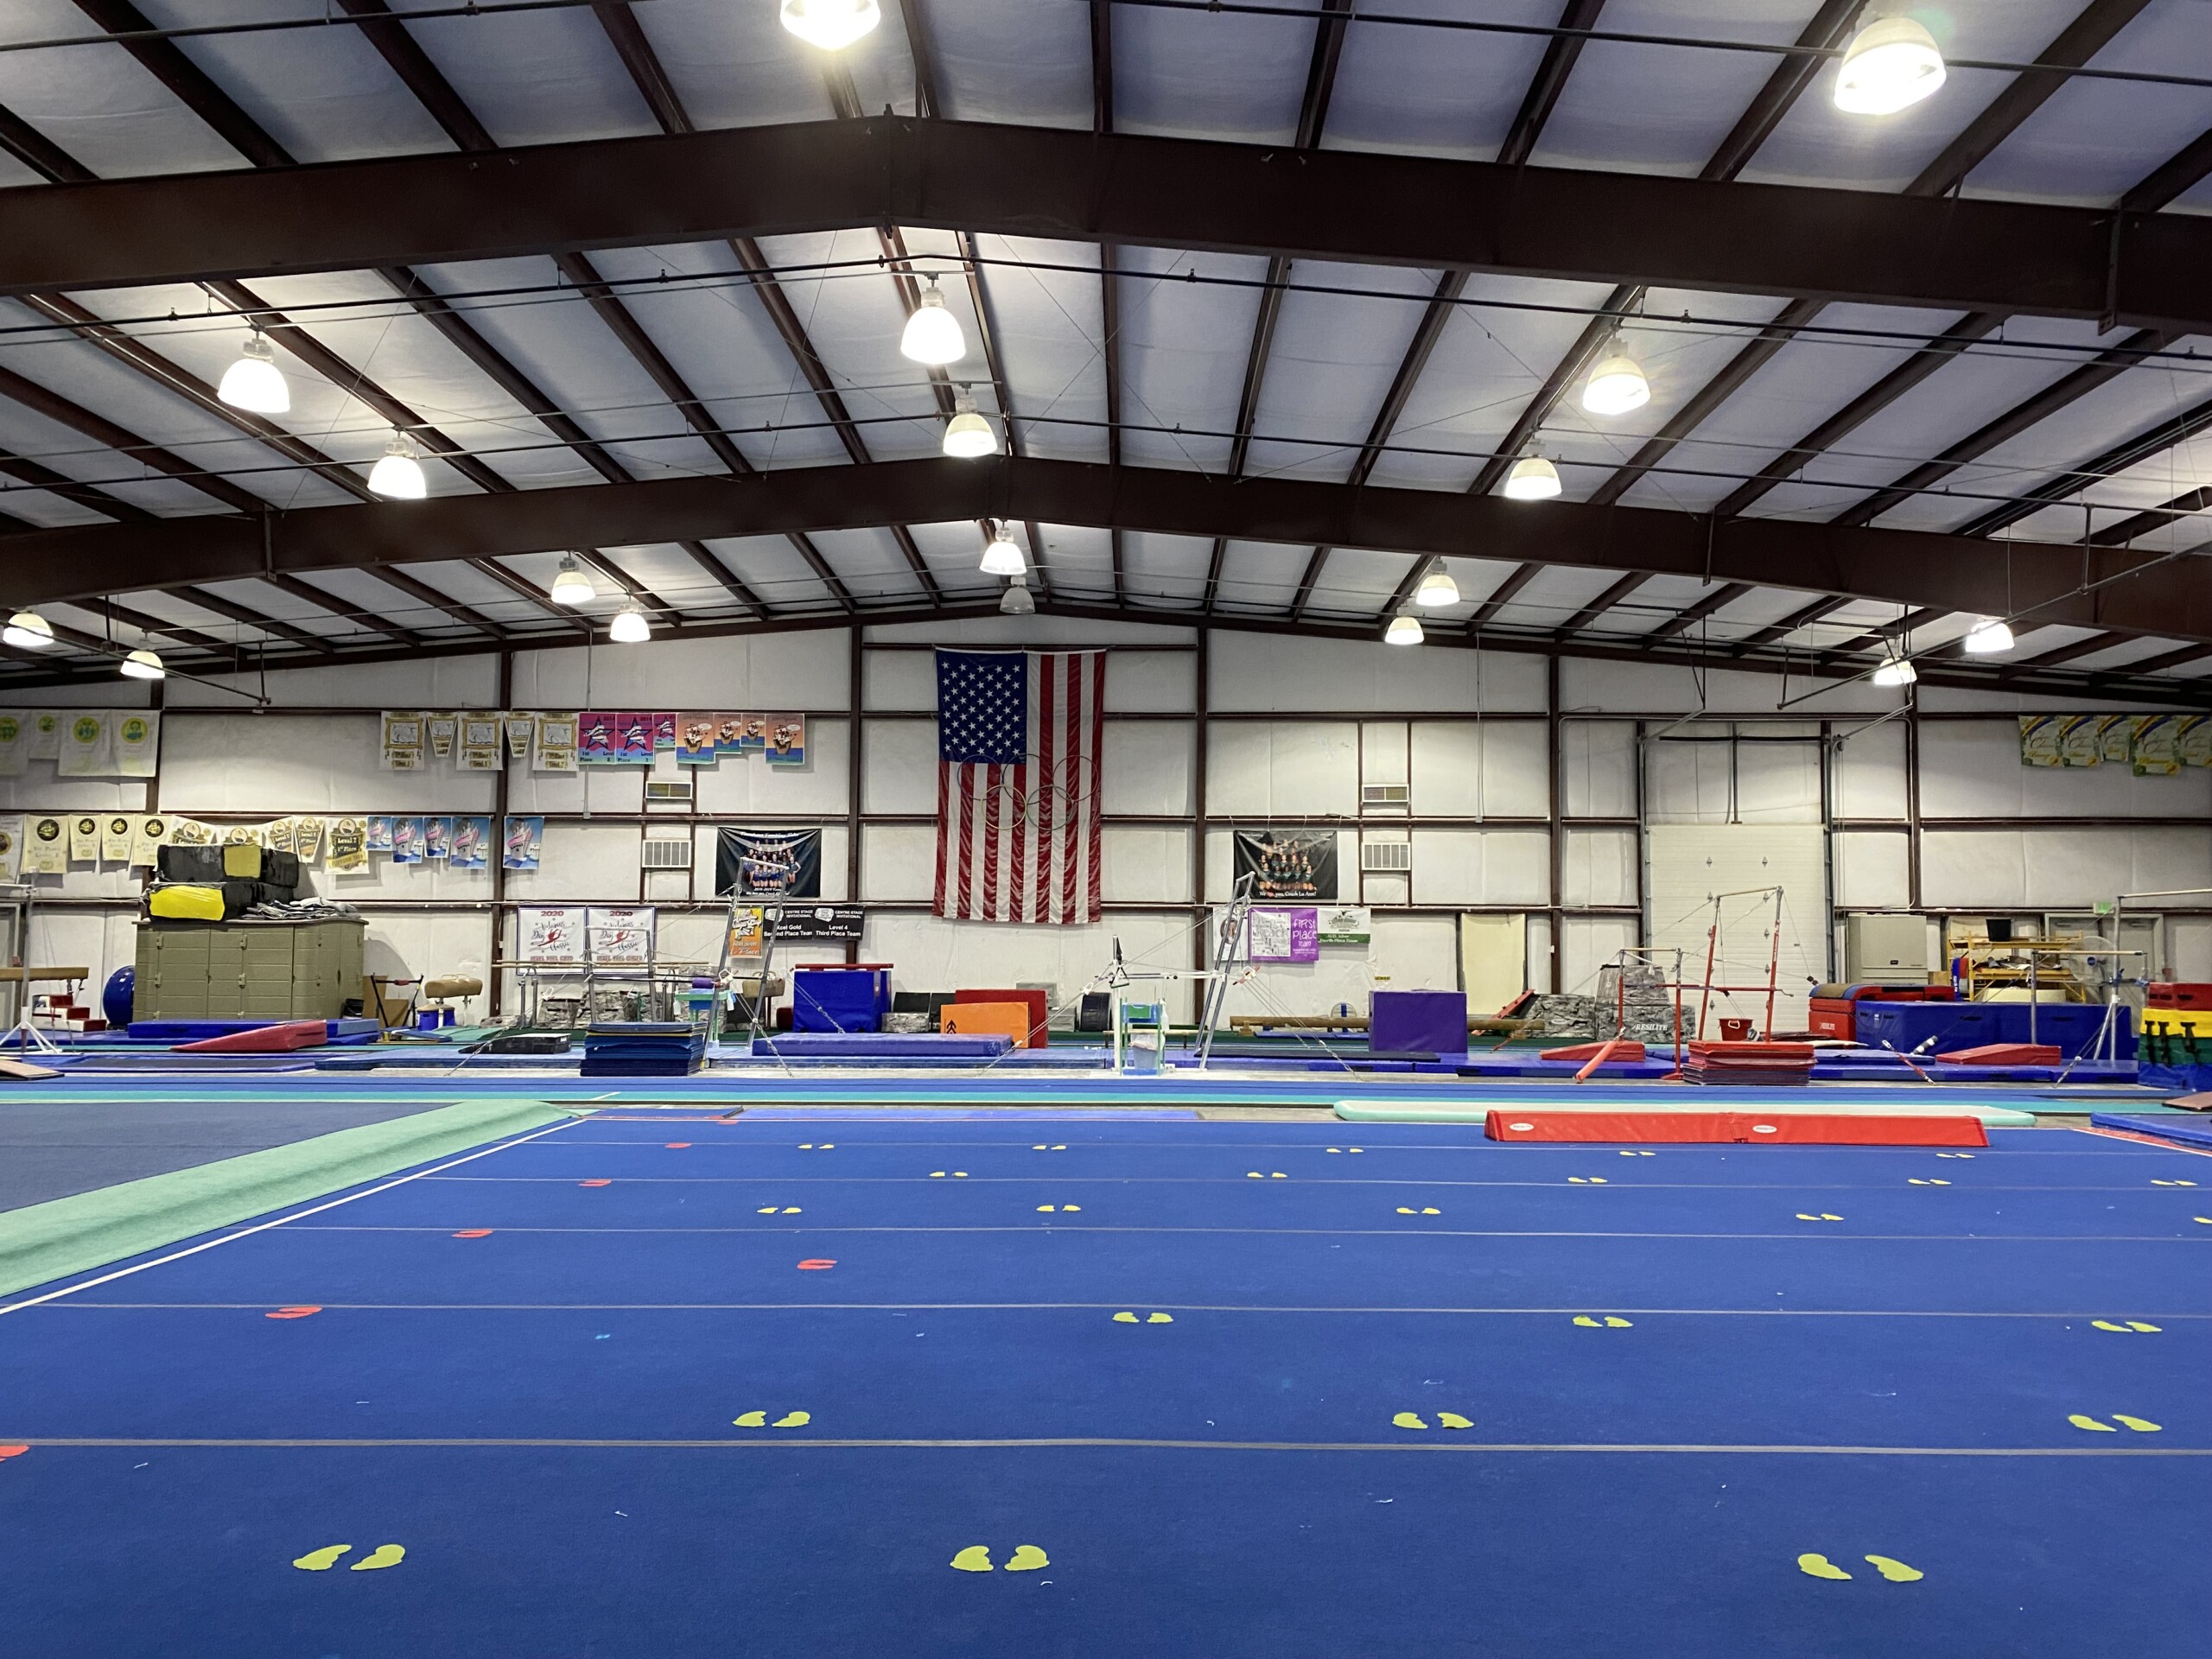 New beginnings: Tuscaloosa Tumbling Tides searches for a new home